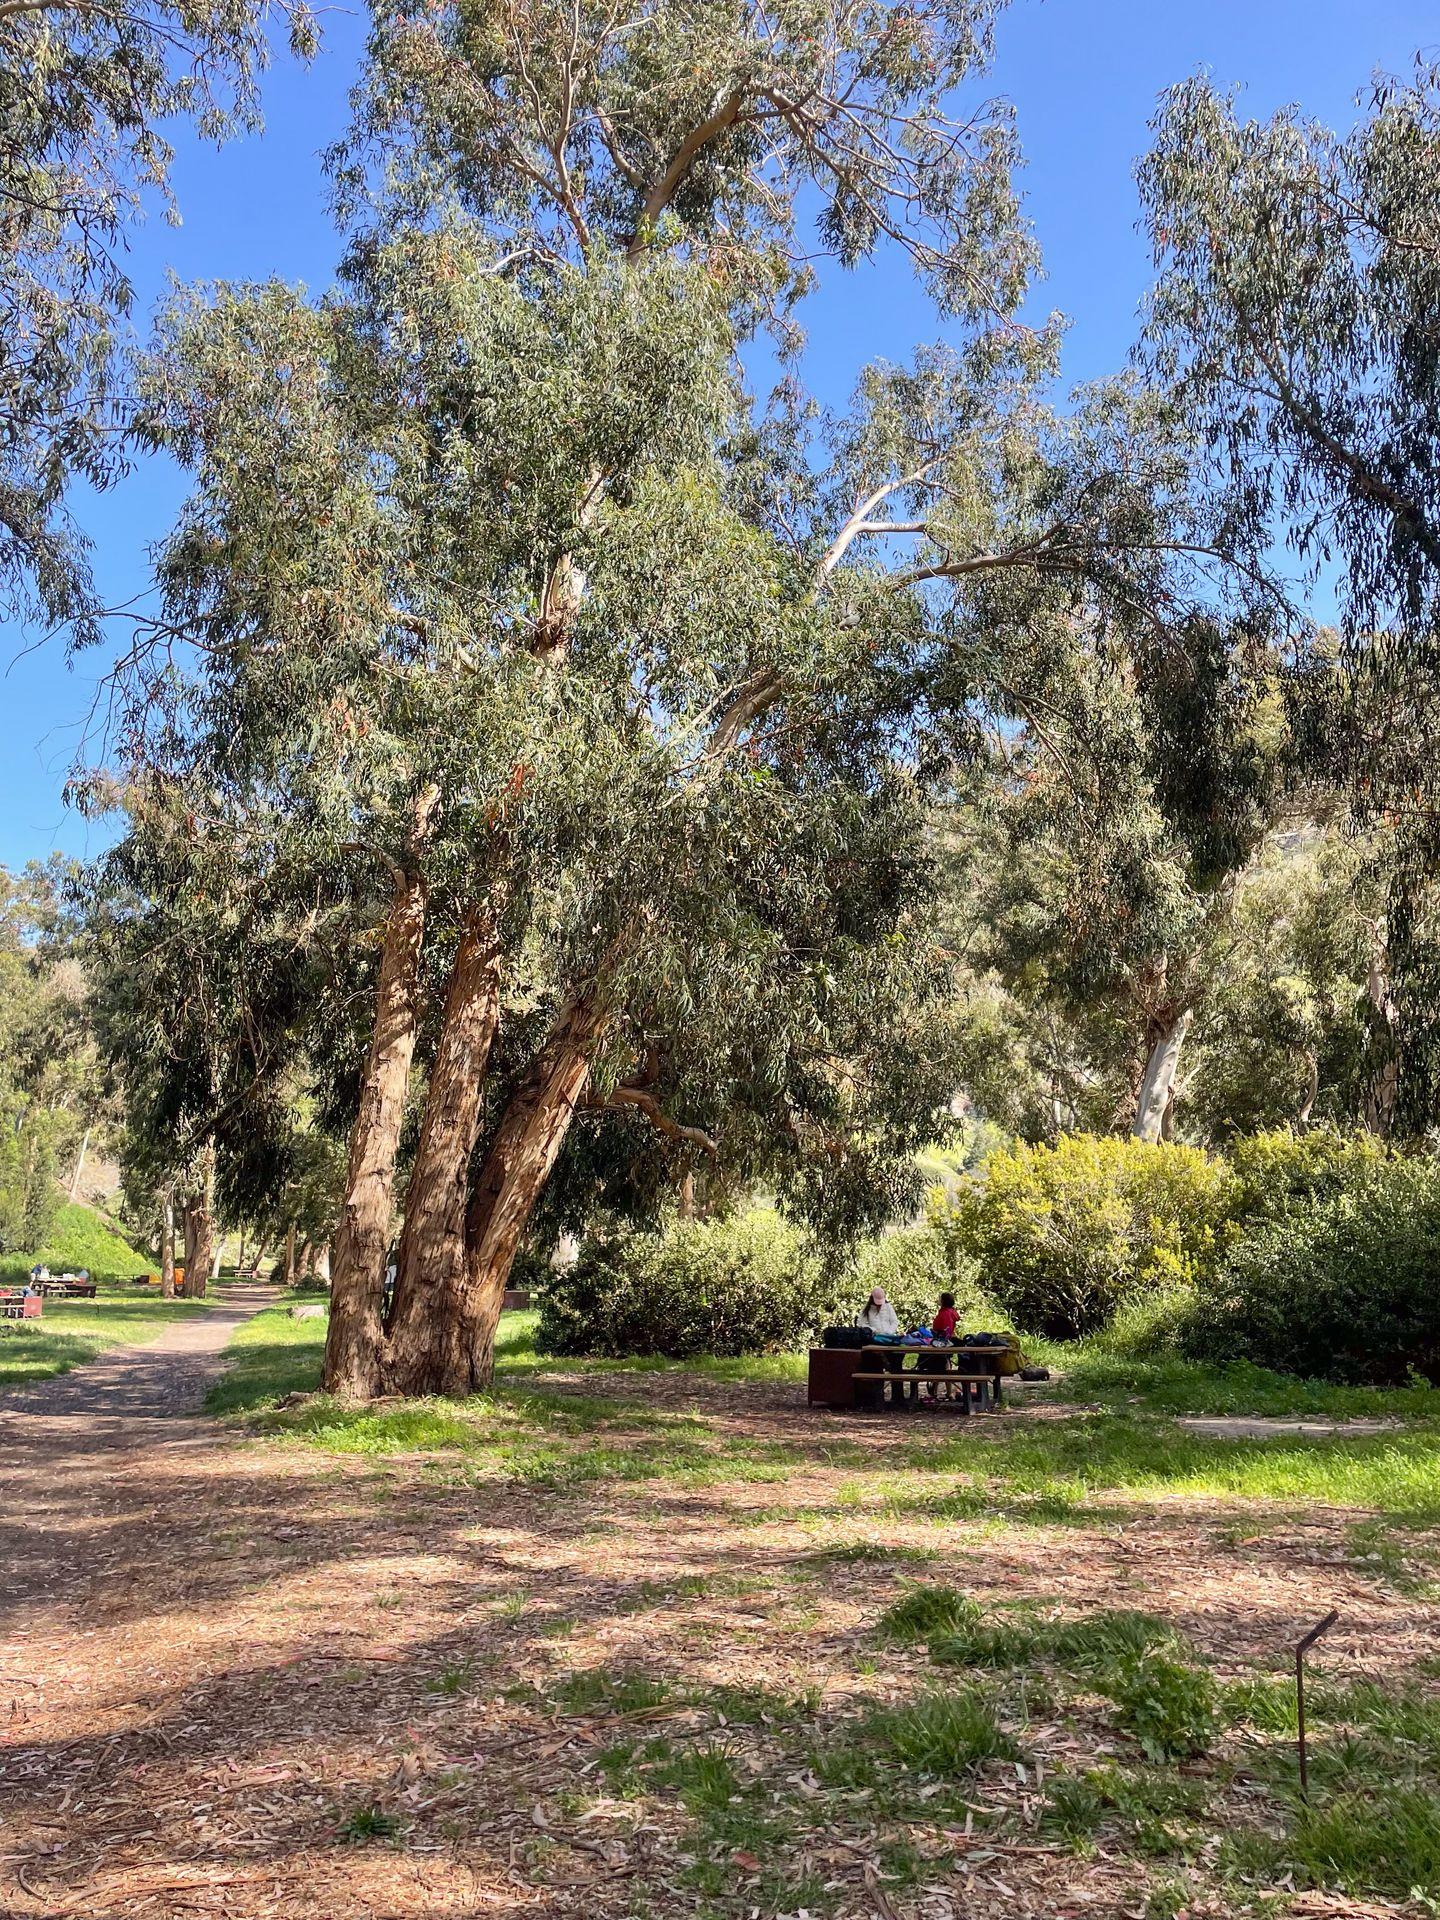 A picnic table under a tree at the Scorpion Canyon Campground on Santa Cruz Island